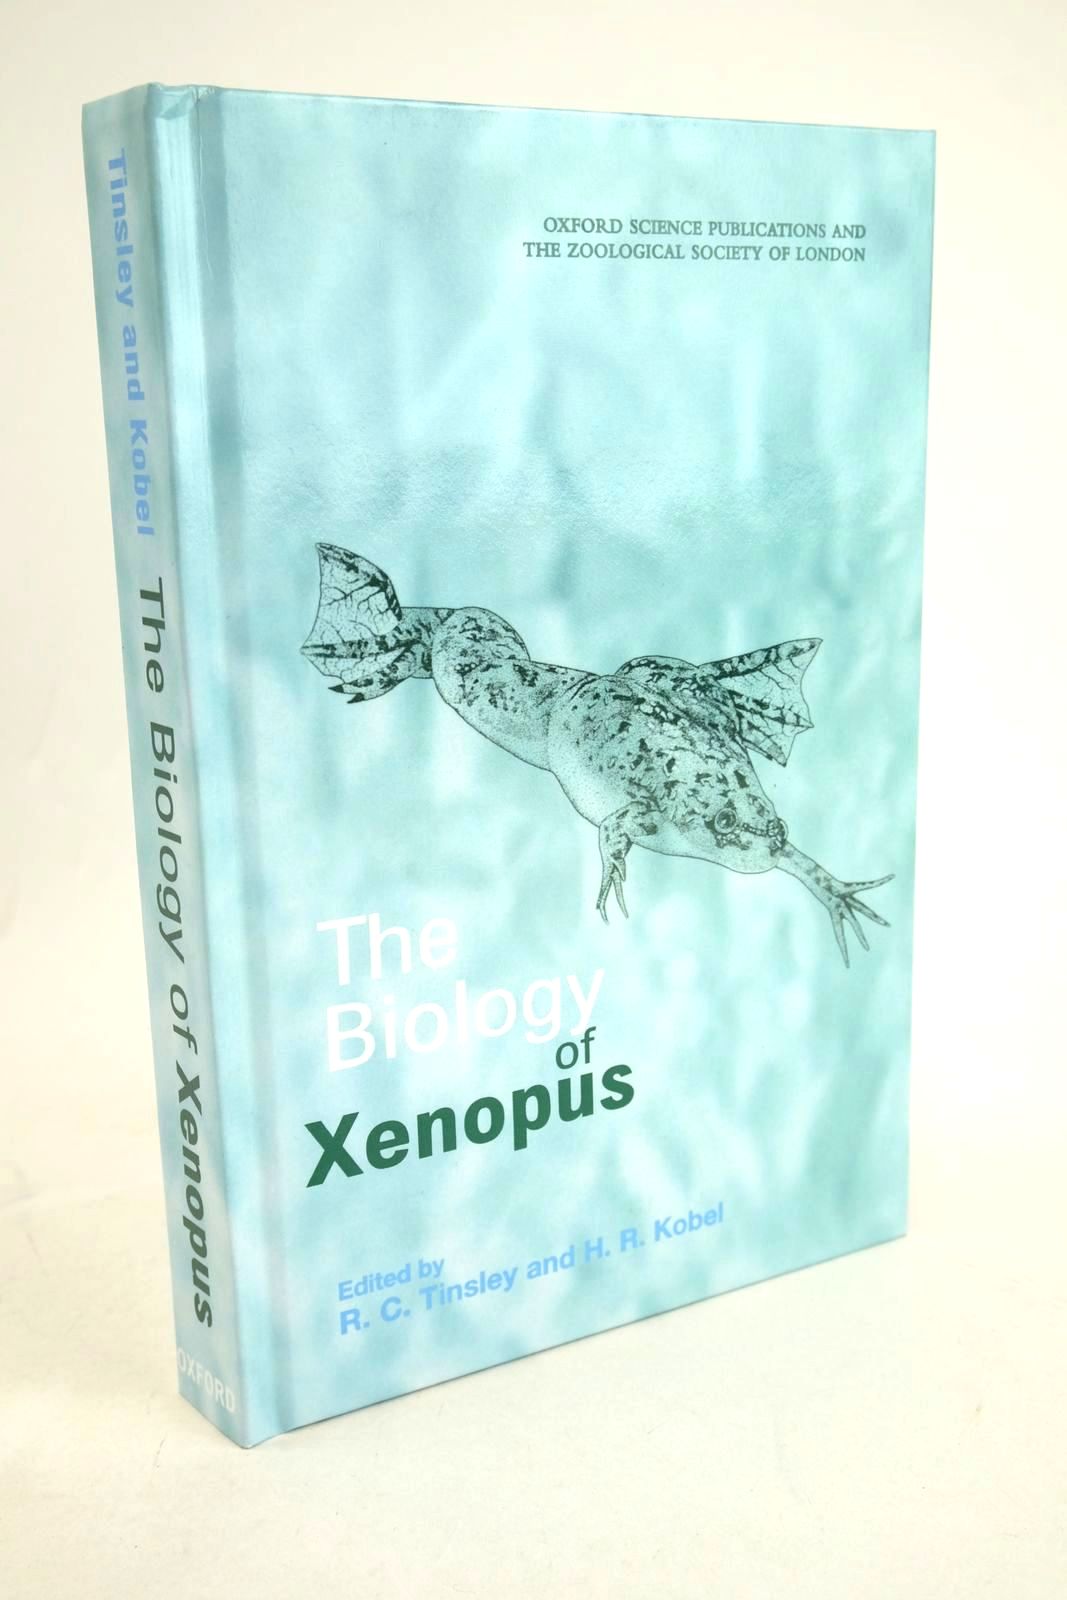 Photo of THE BIOLOGY OF XENOPUS written by Tinsley, R.C. Kobel, H.R. published by Oxford University Press (STOCK CODE: 1327428)  for sale by Stella & Rose's Books